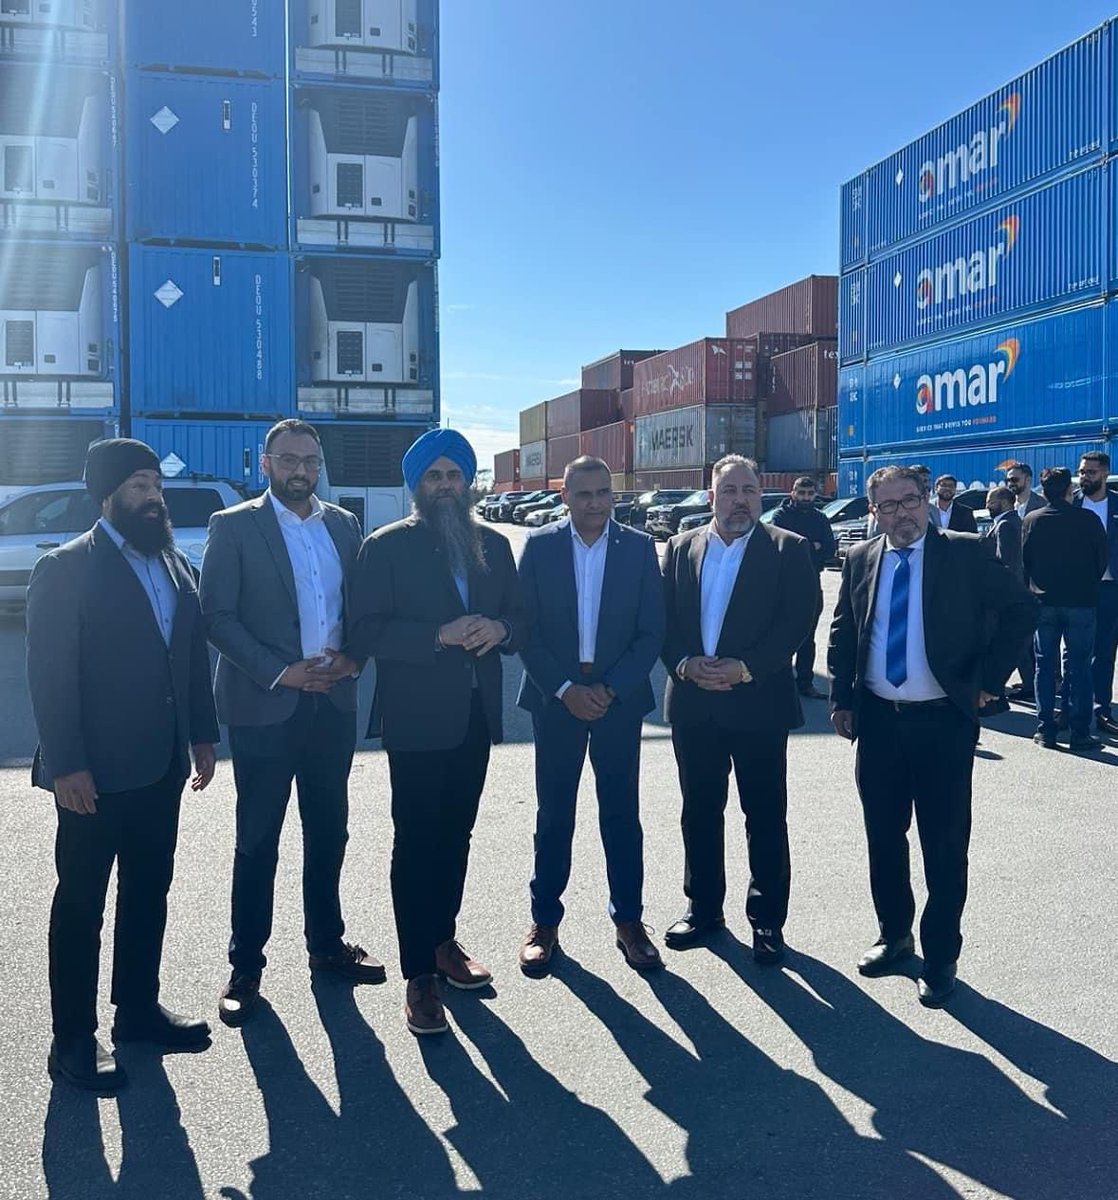 Today during a visit to the GTA with our leader @PierrePoilievre, we got to hear the inspiring story of Amar Deol, who went from being a 17-year-old truck driver, to having one of the fastest growing companies, Amar Group, in Canada.